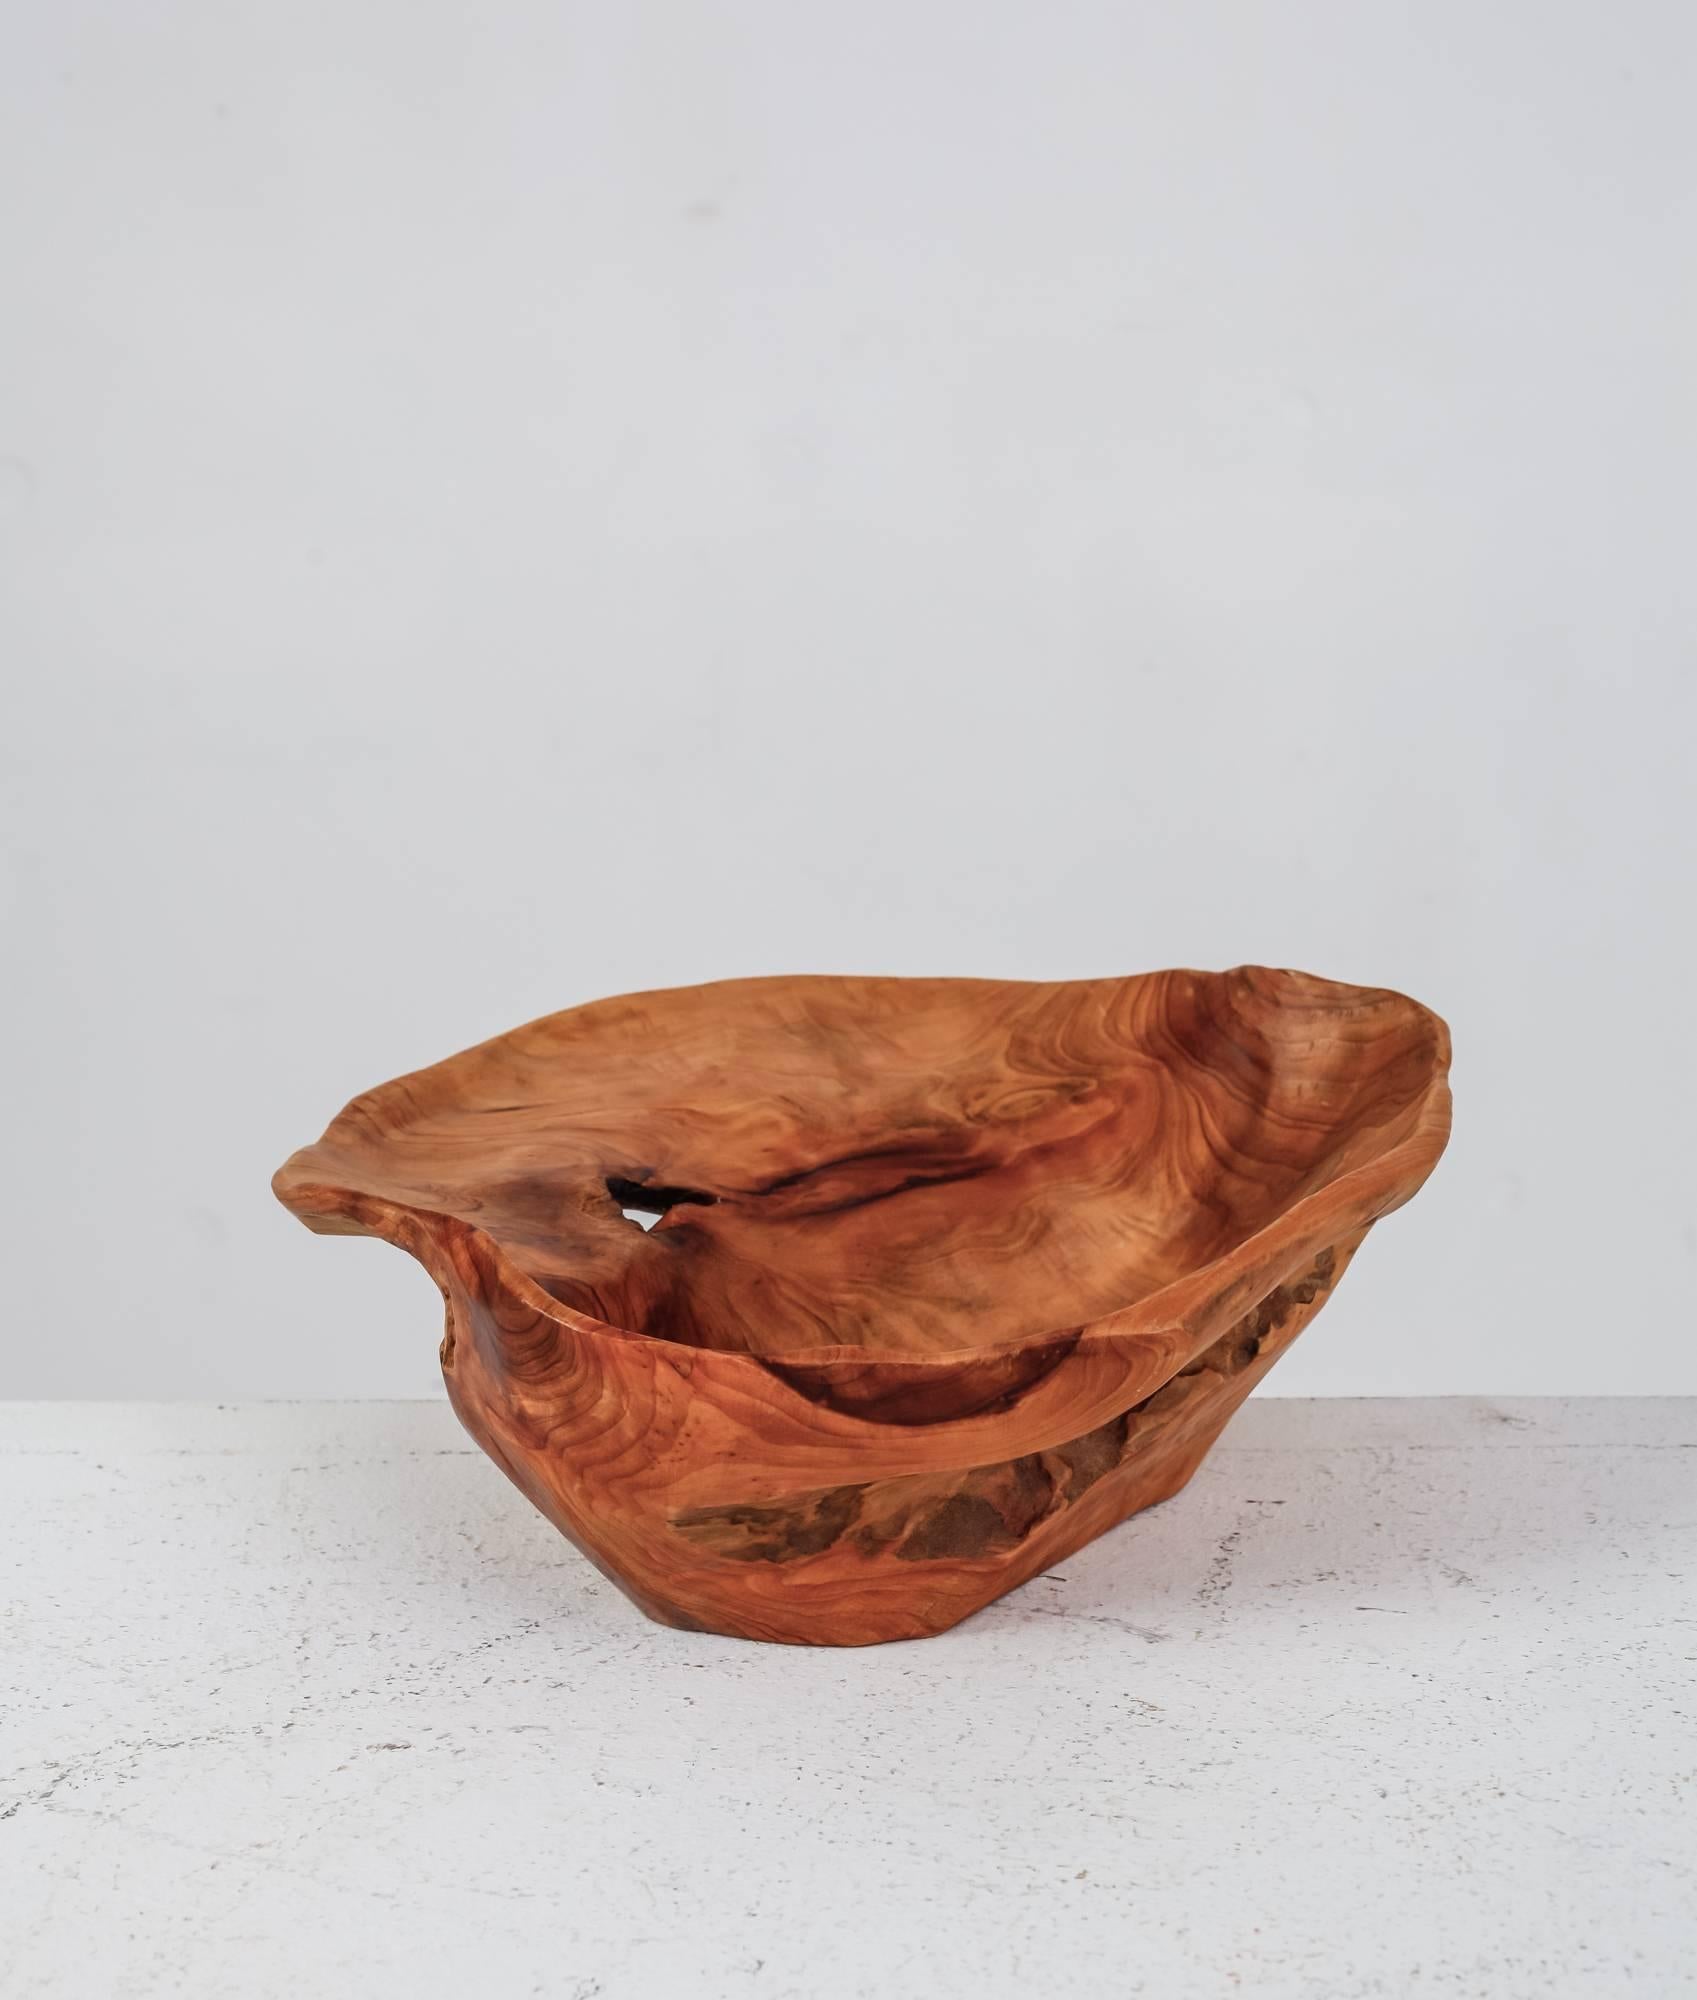 American Craftsman Organically Shaped Wooden Bowl, Signed 'CC 72', USA